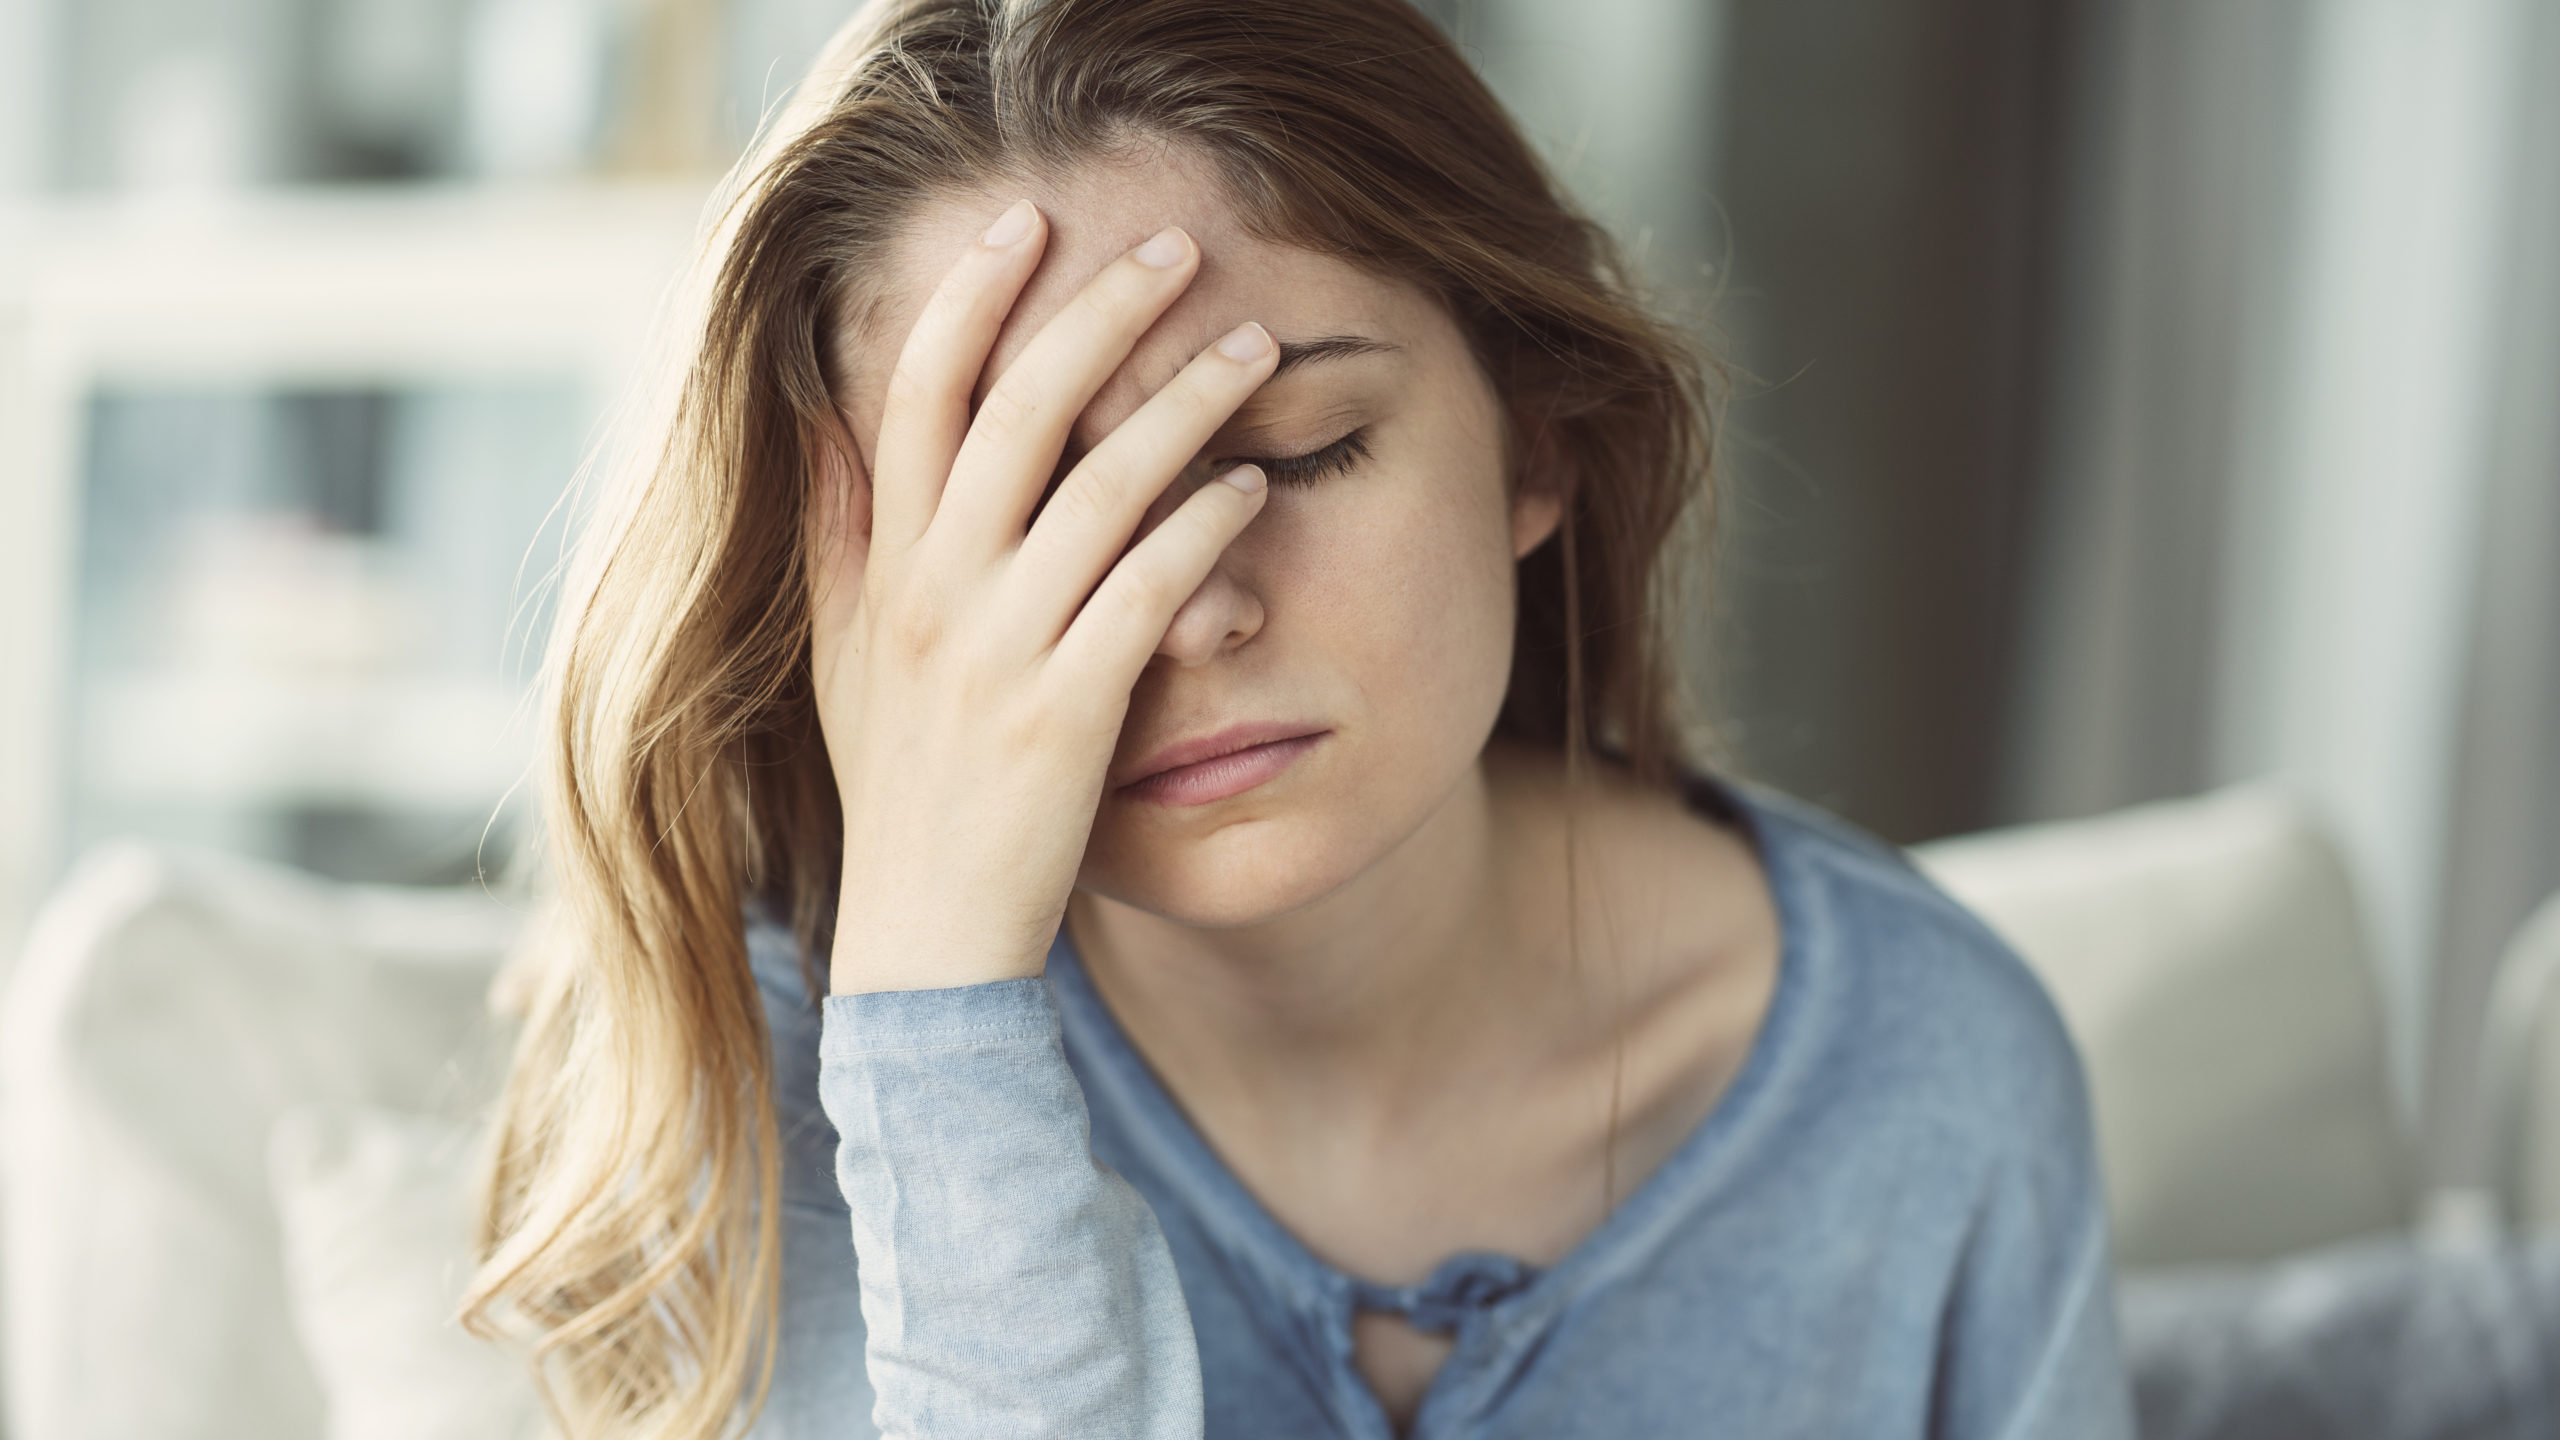 6 Effective Ways to Manage Migraines During the COVID-19